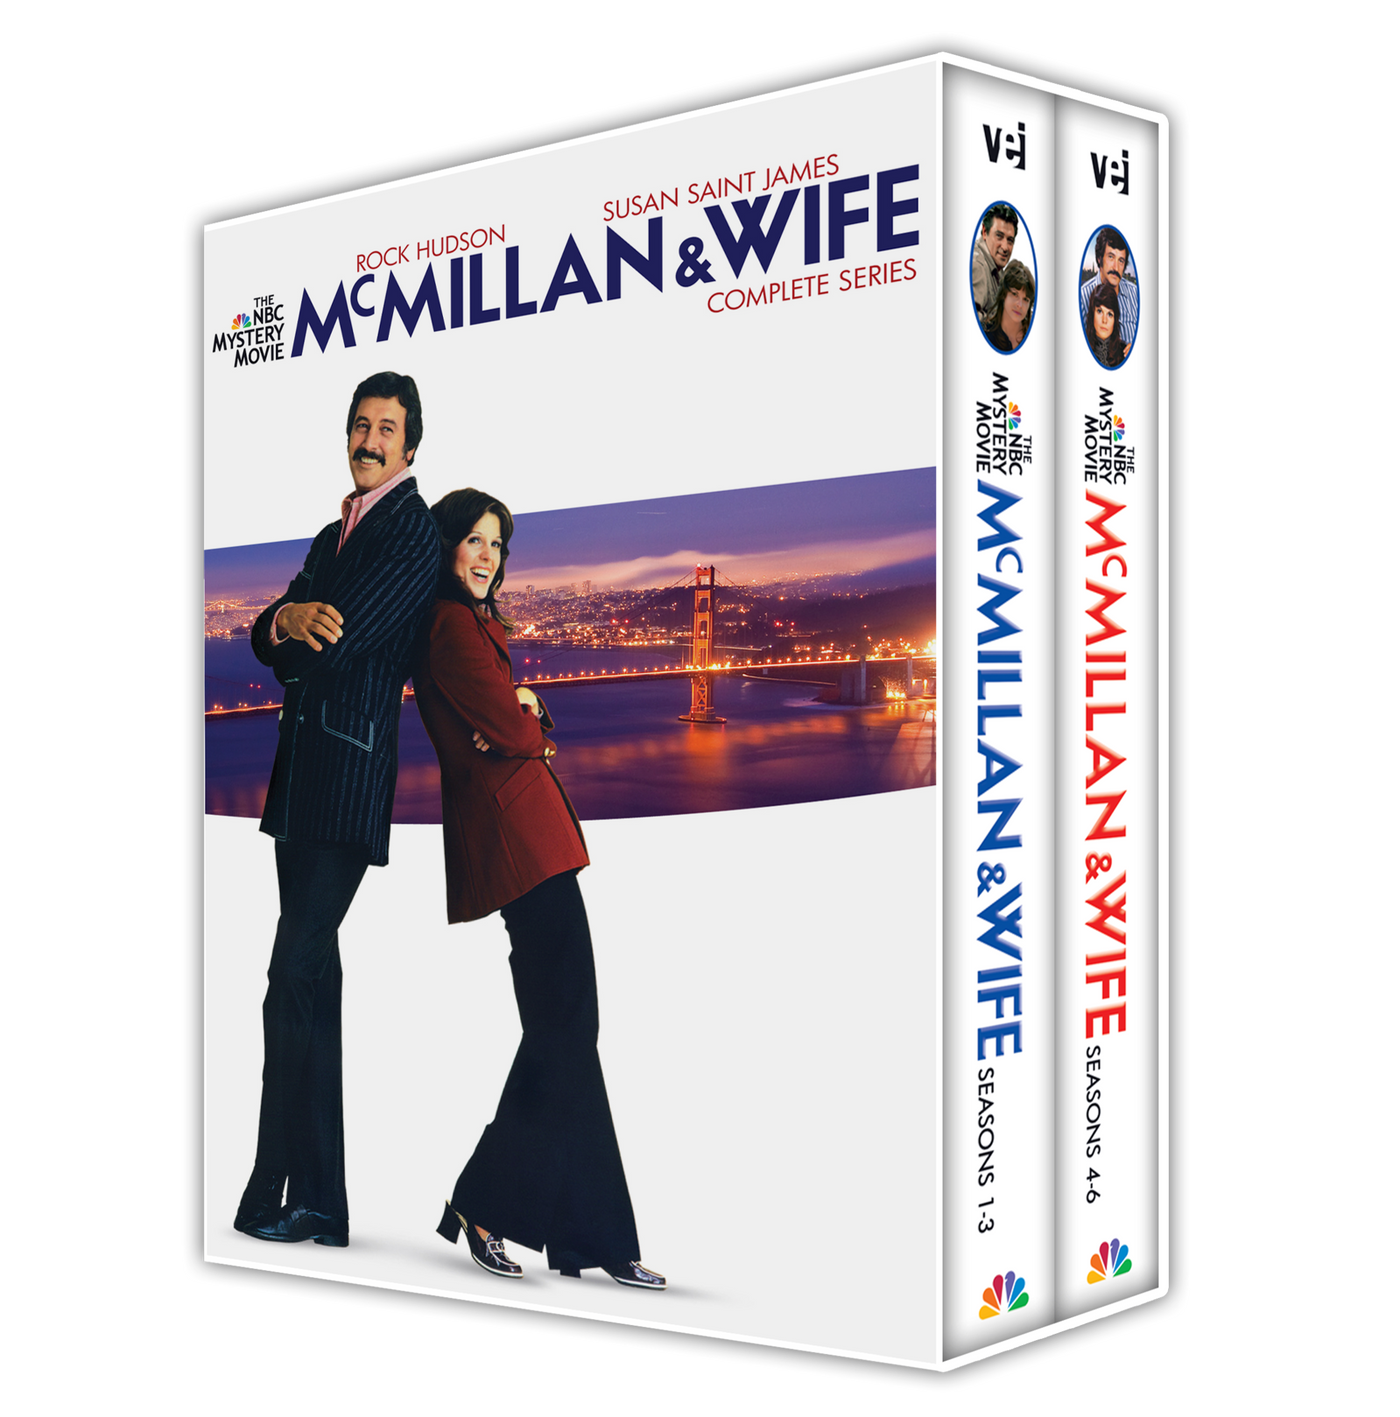 Mcmillan and wife dvd collection, Rock Hudson, Susant saint james